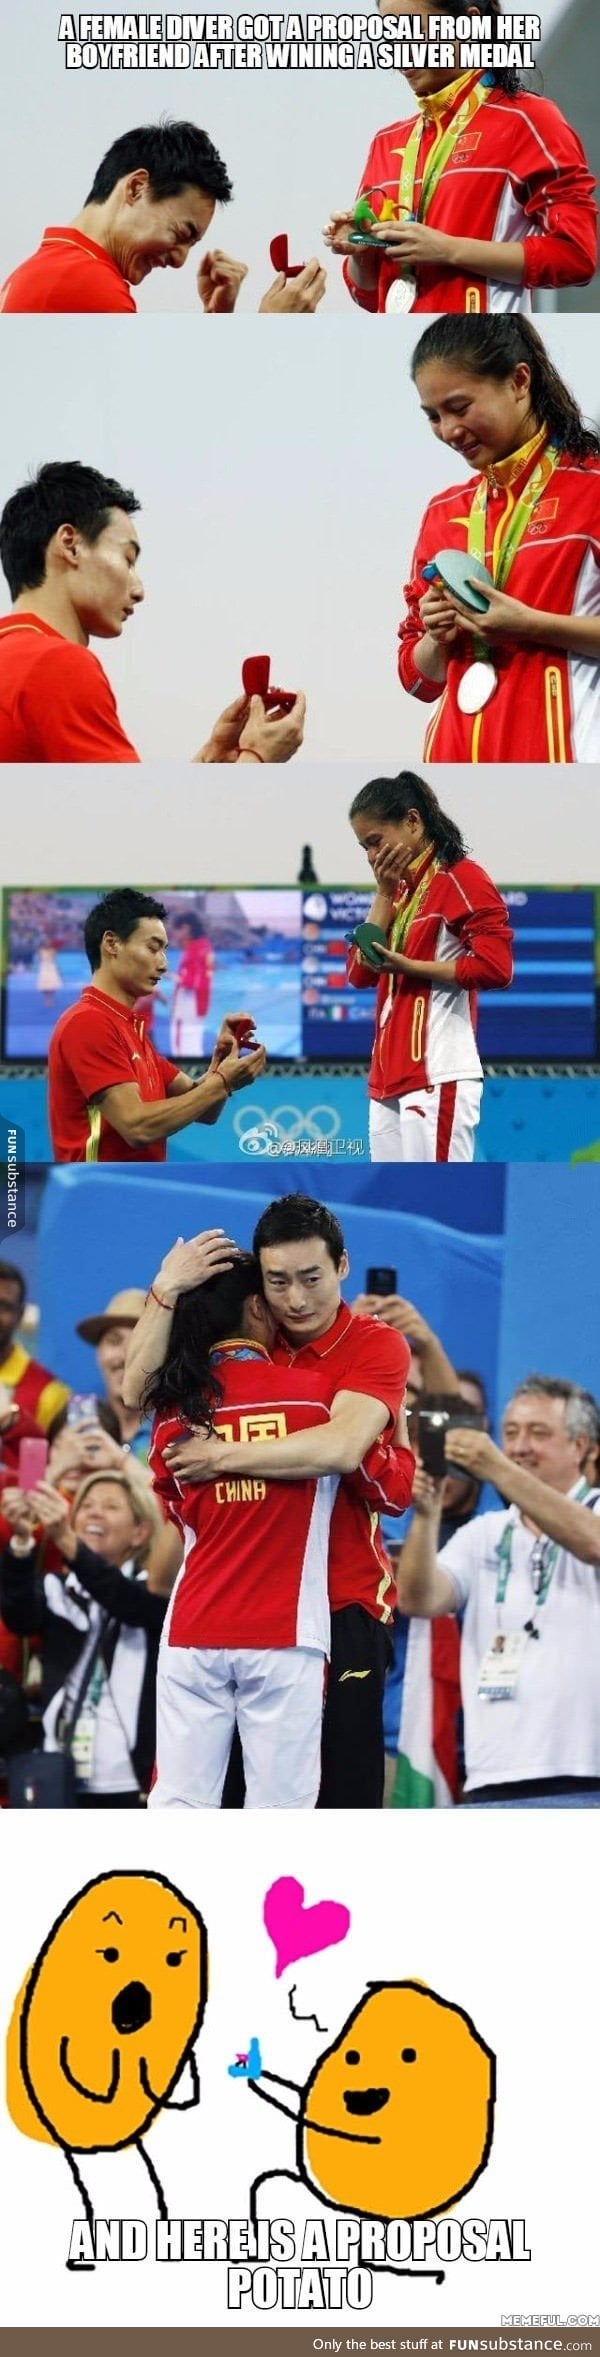 Chinese diver He Zi wins silver medal, then gets a diamond ring